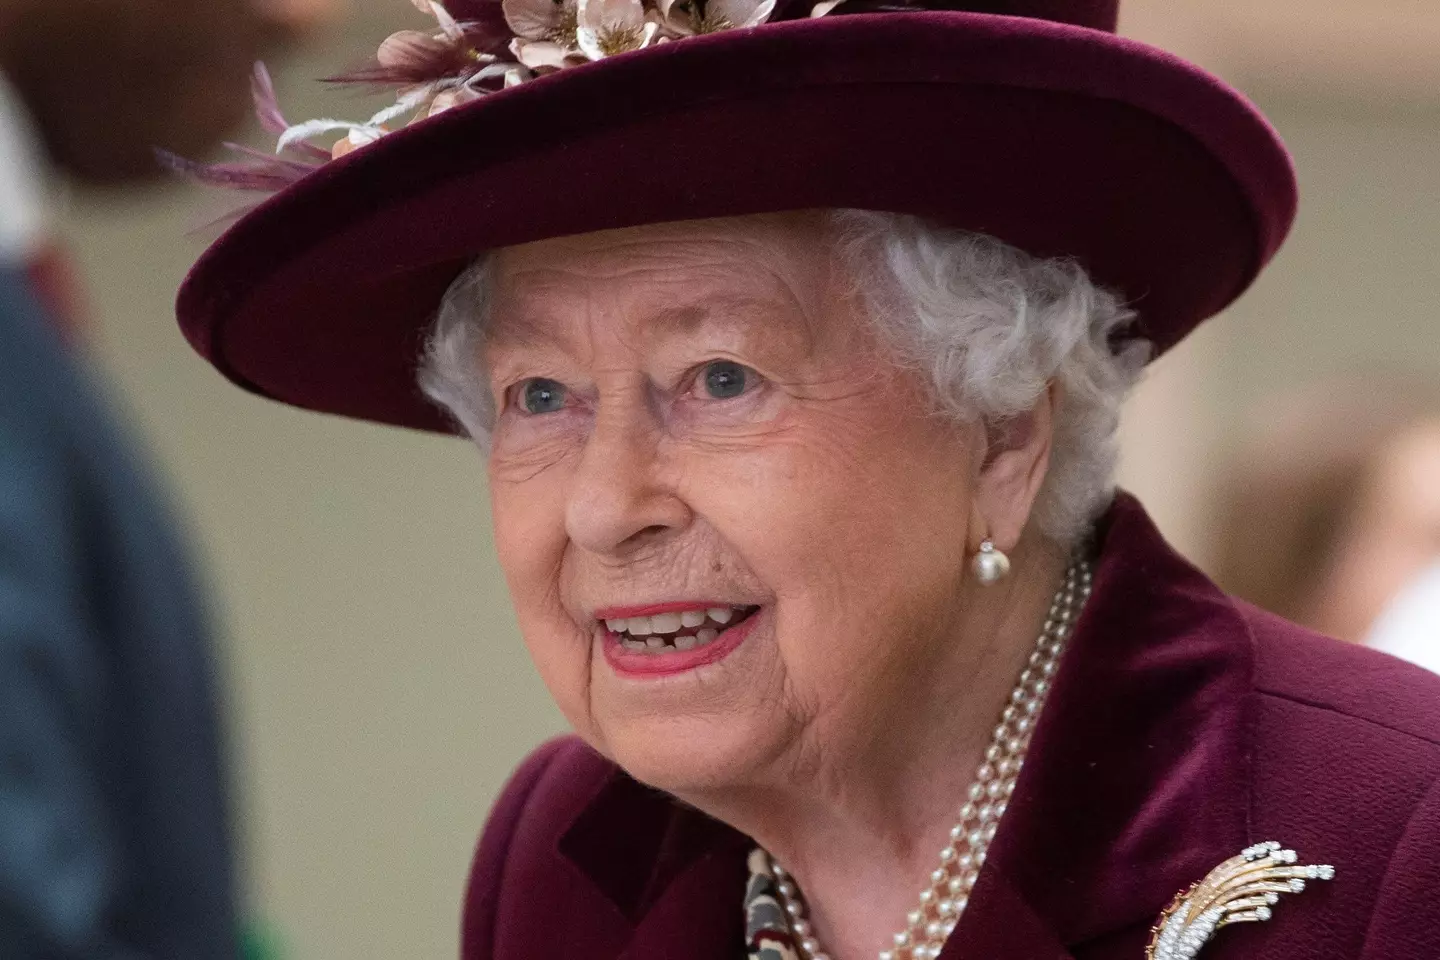 The Queen’s Platinum Jubilee will see an extra day added to the bank holiday between 2 - 5 June.